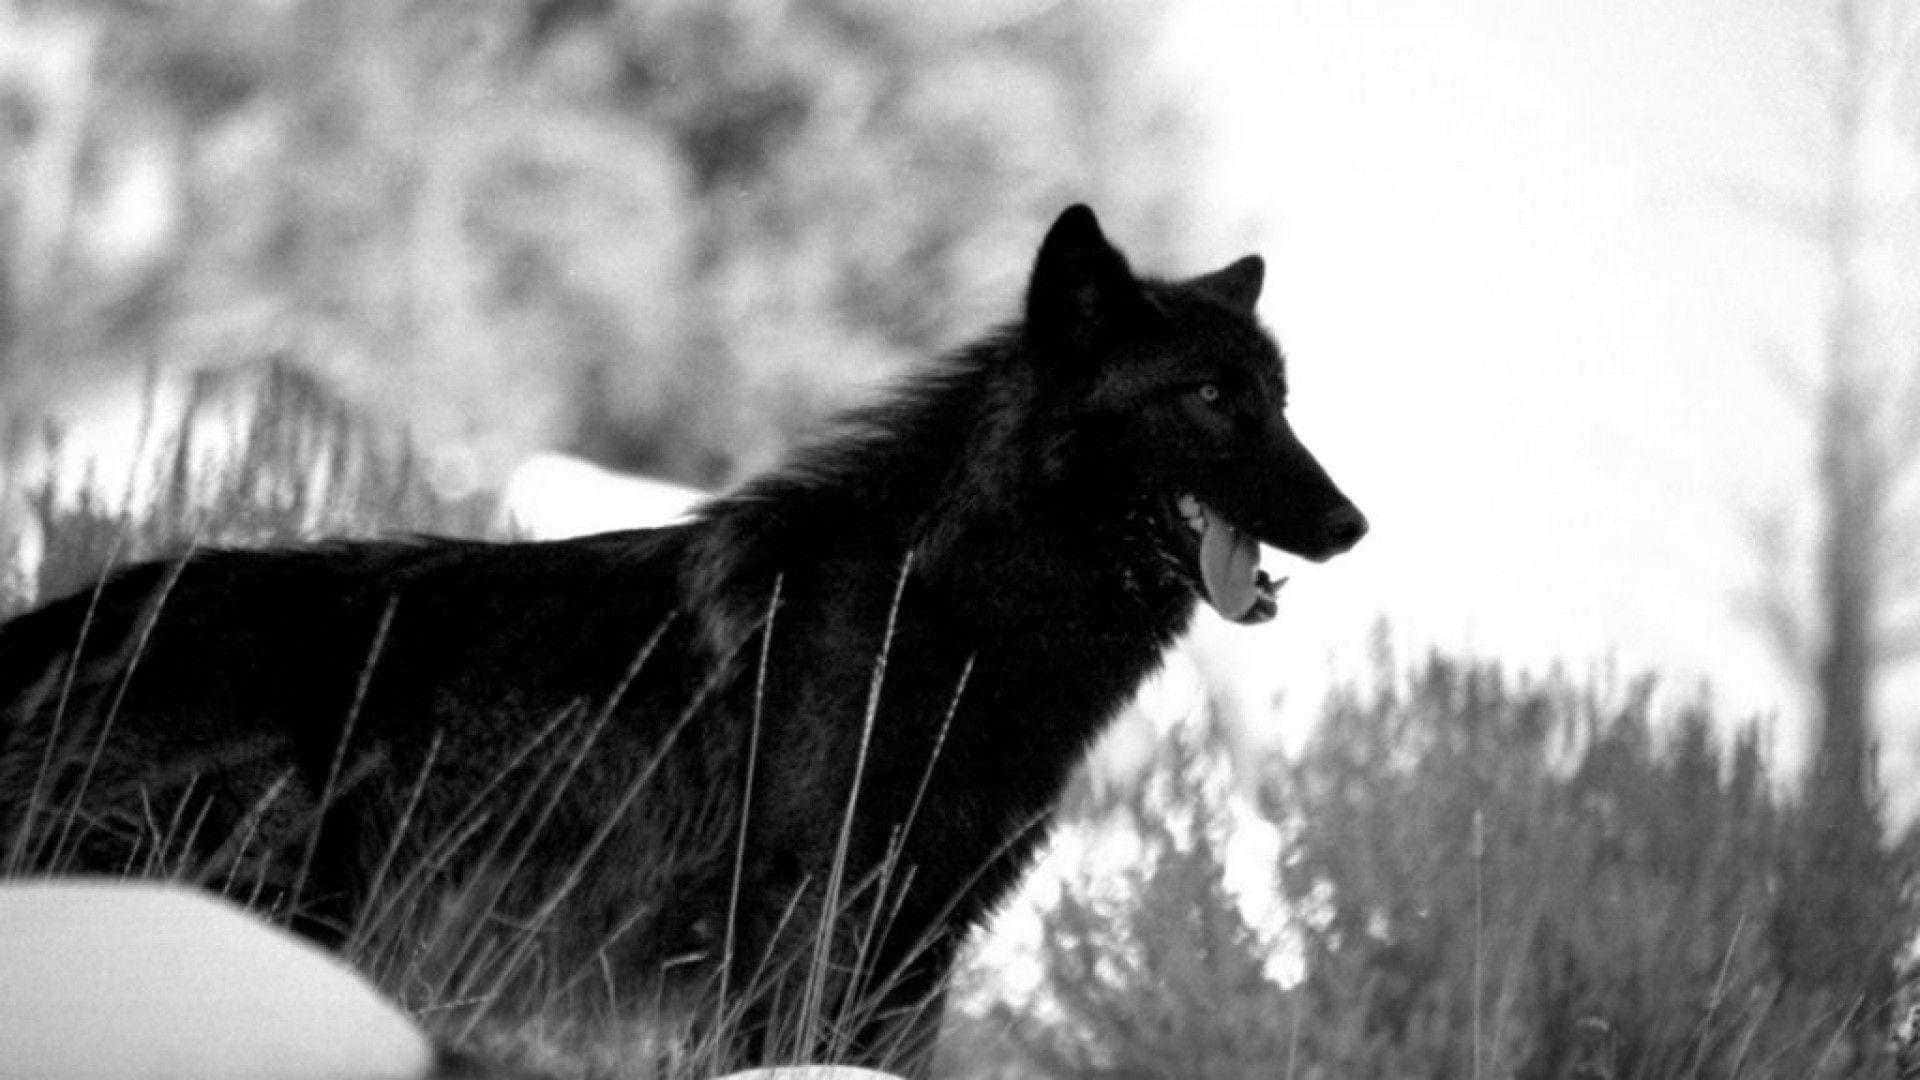 "The Wild Call of The Black Wolf"